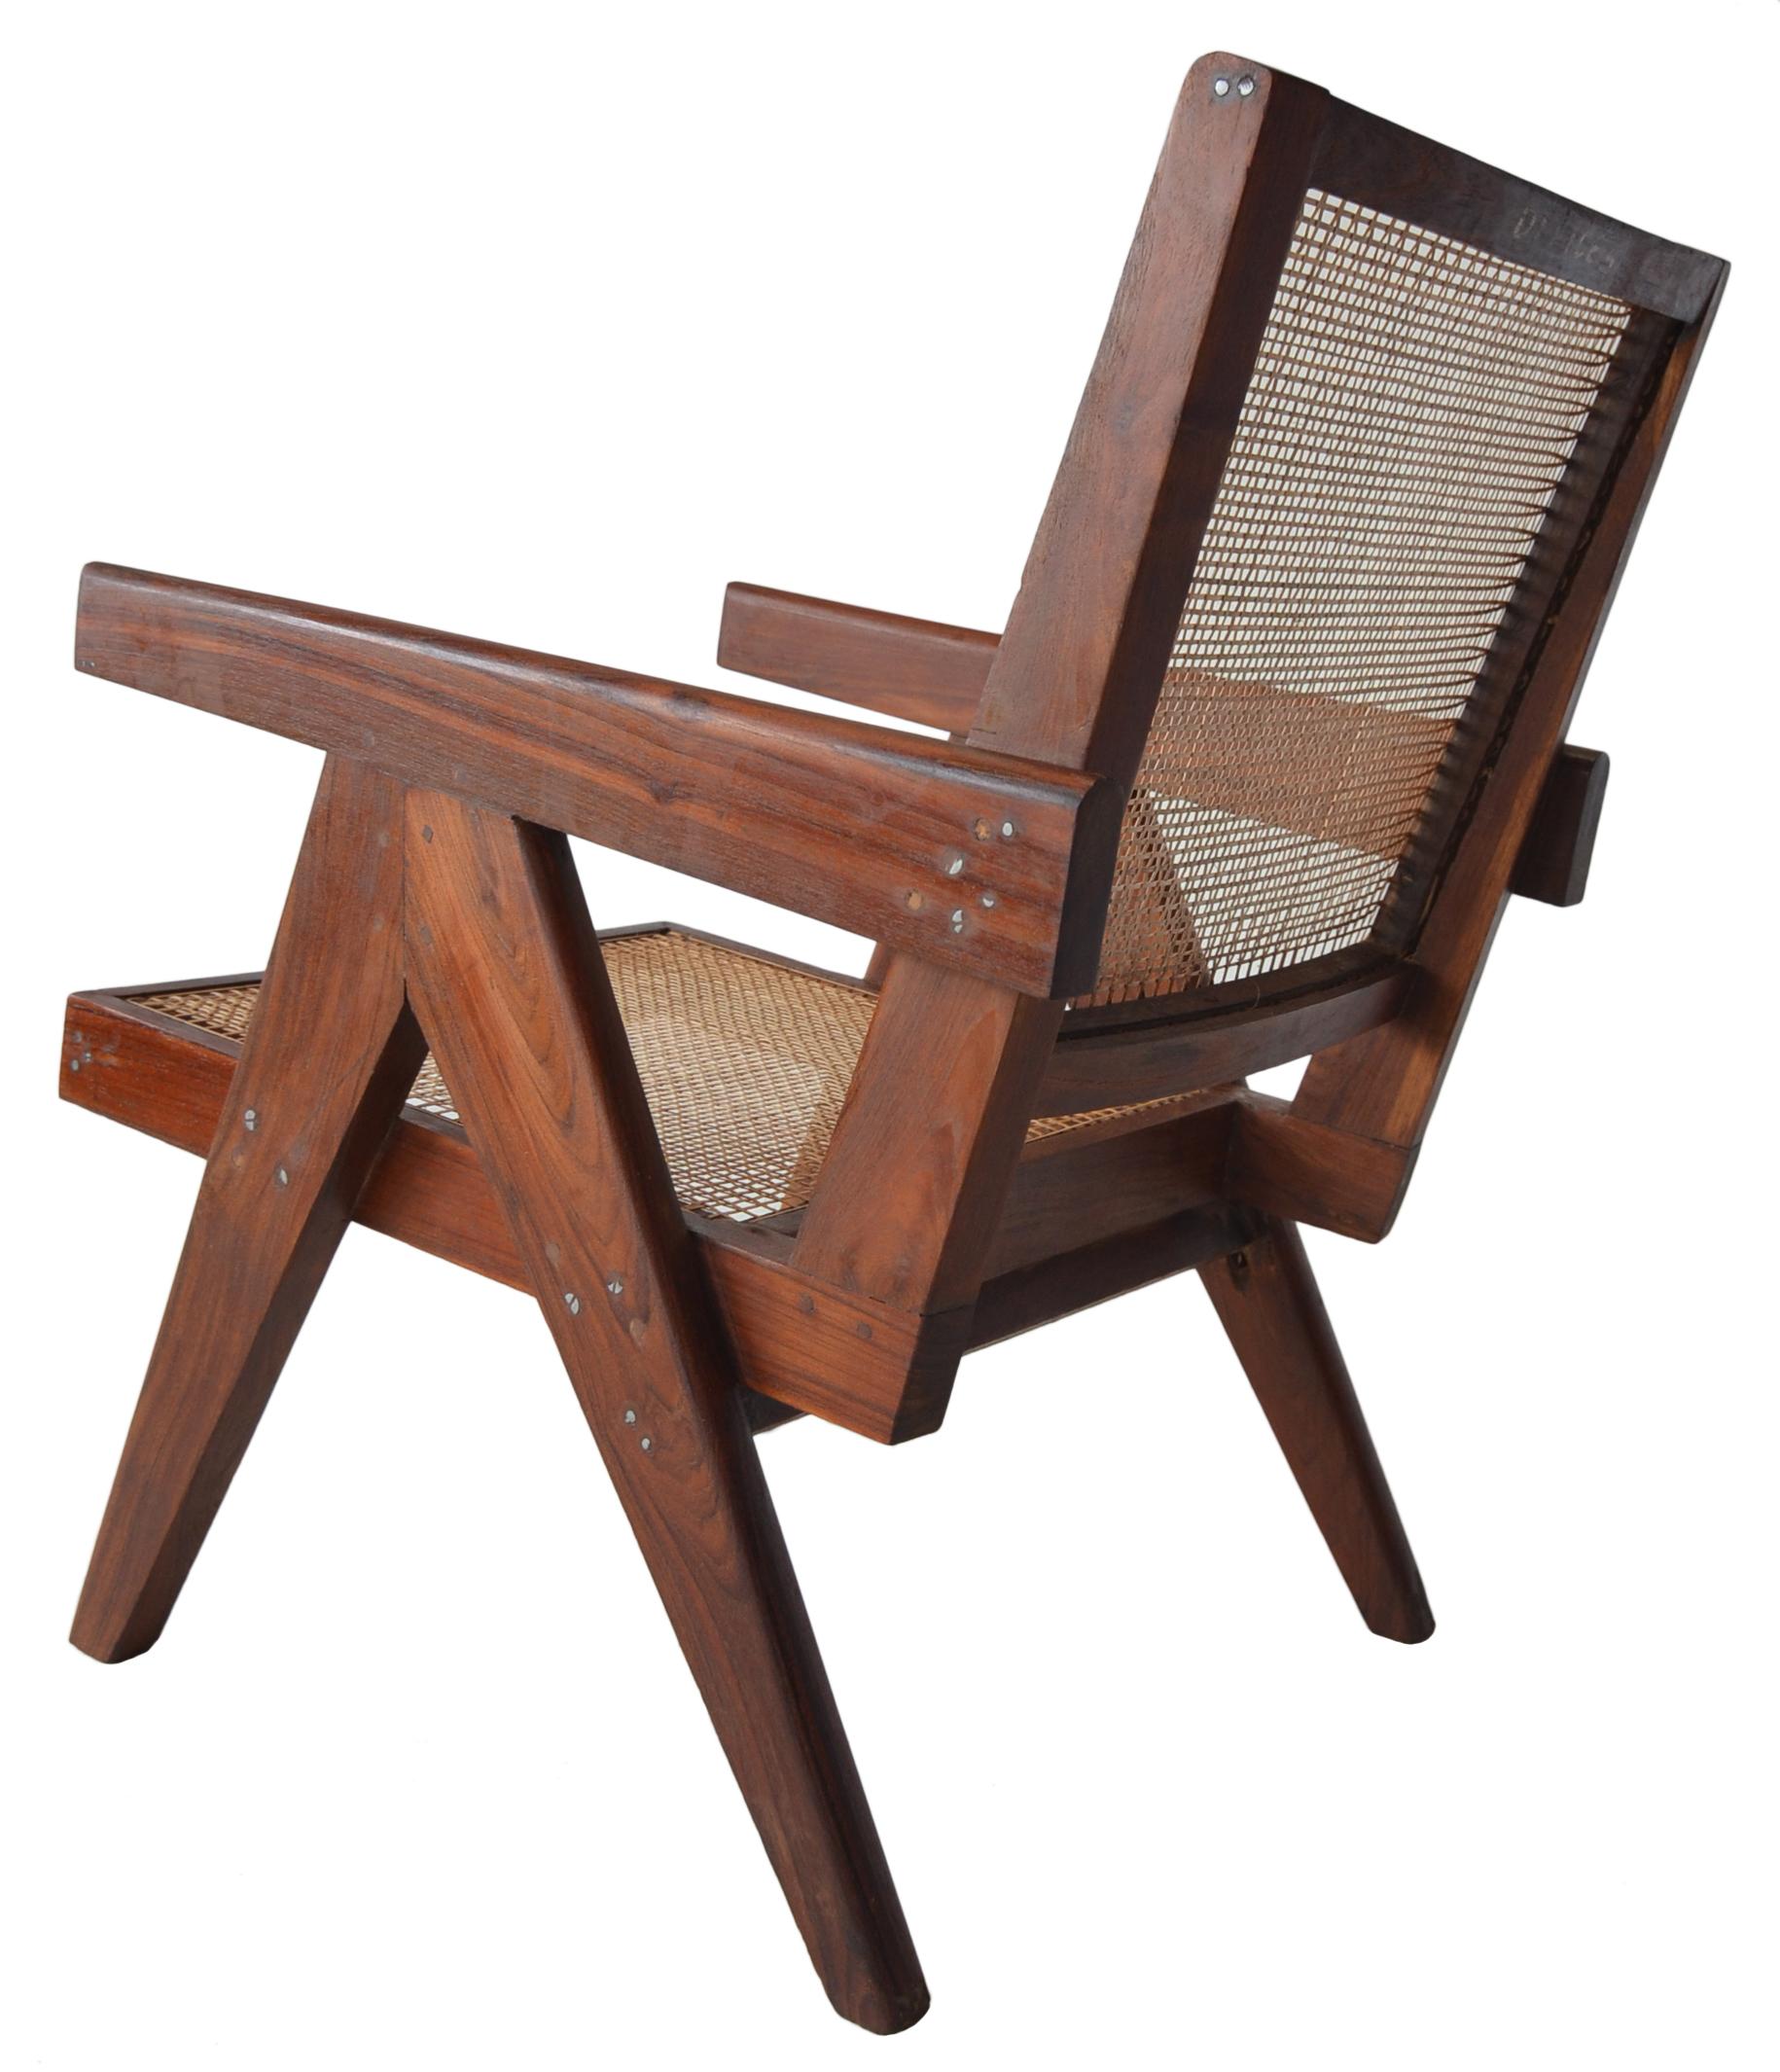 A great pair of easy chairs by Pierre Jeanneret for the Chandigarh project. In a very rare and desirable Sisso Rosewood. This pair is lightly and sympathetically renovated. A simple cleaning and waxing was performed to bring out the color and grain